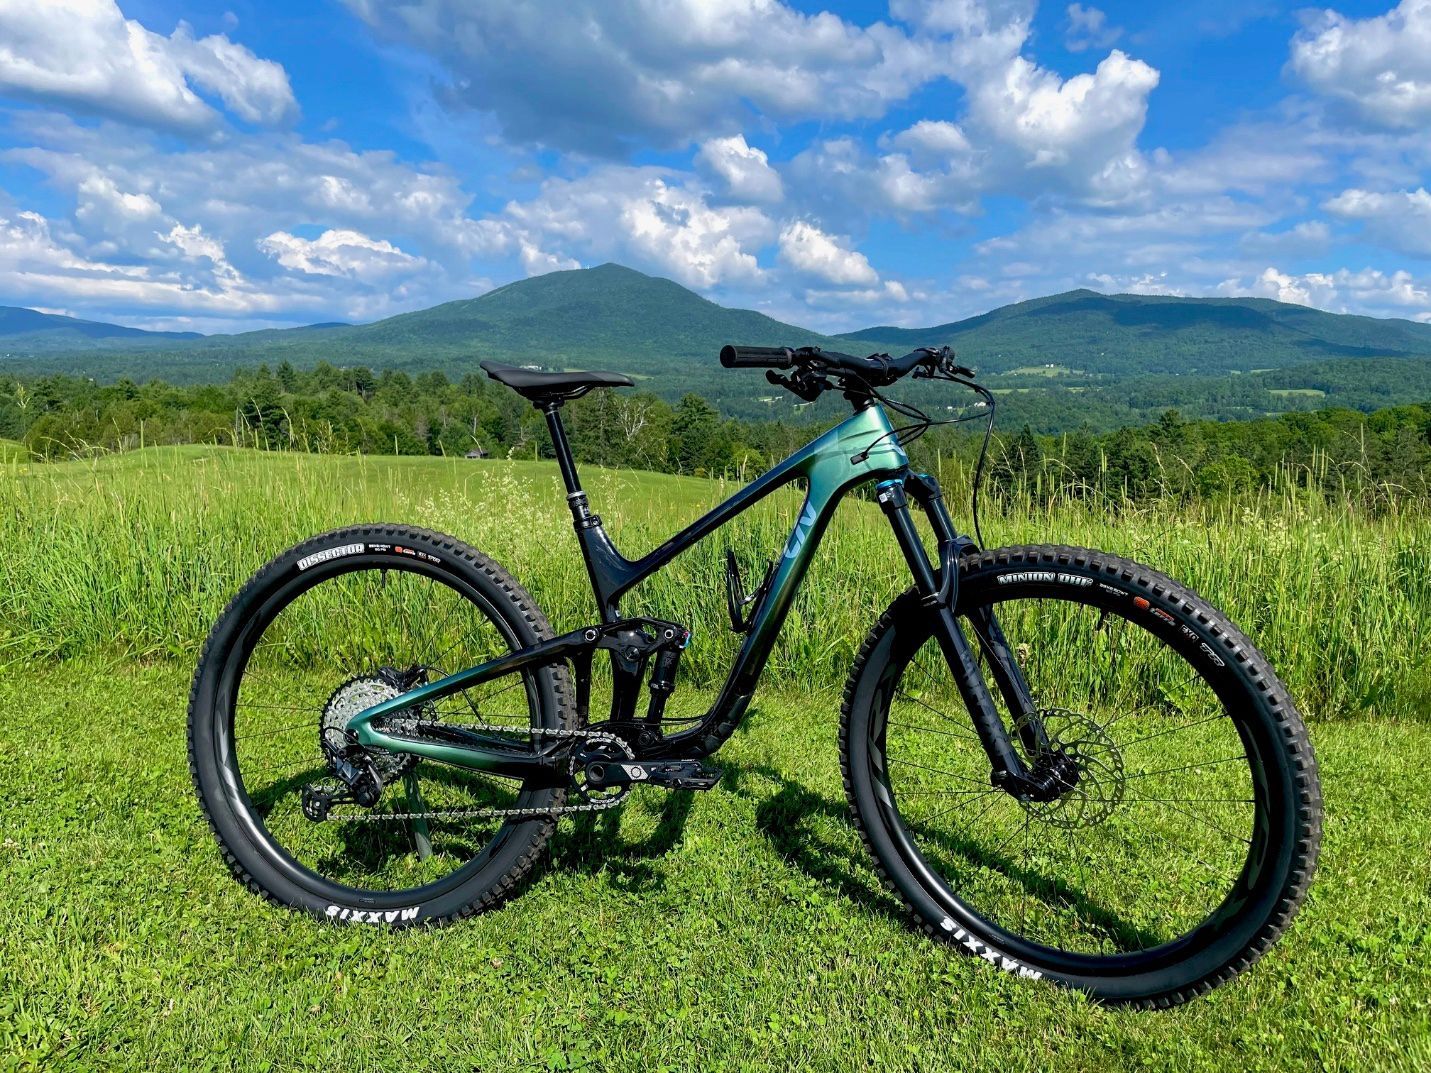 Green aluminum Liv Intrigue 2 mountain bike in a field with Burke Mountain, Vermont in the background